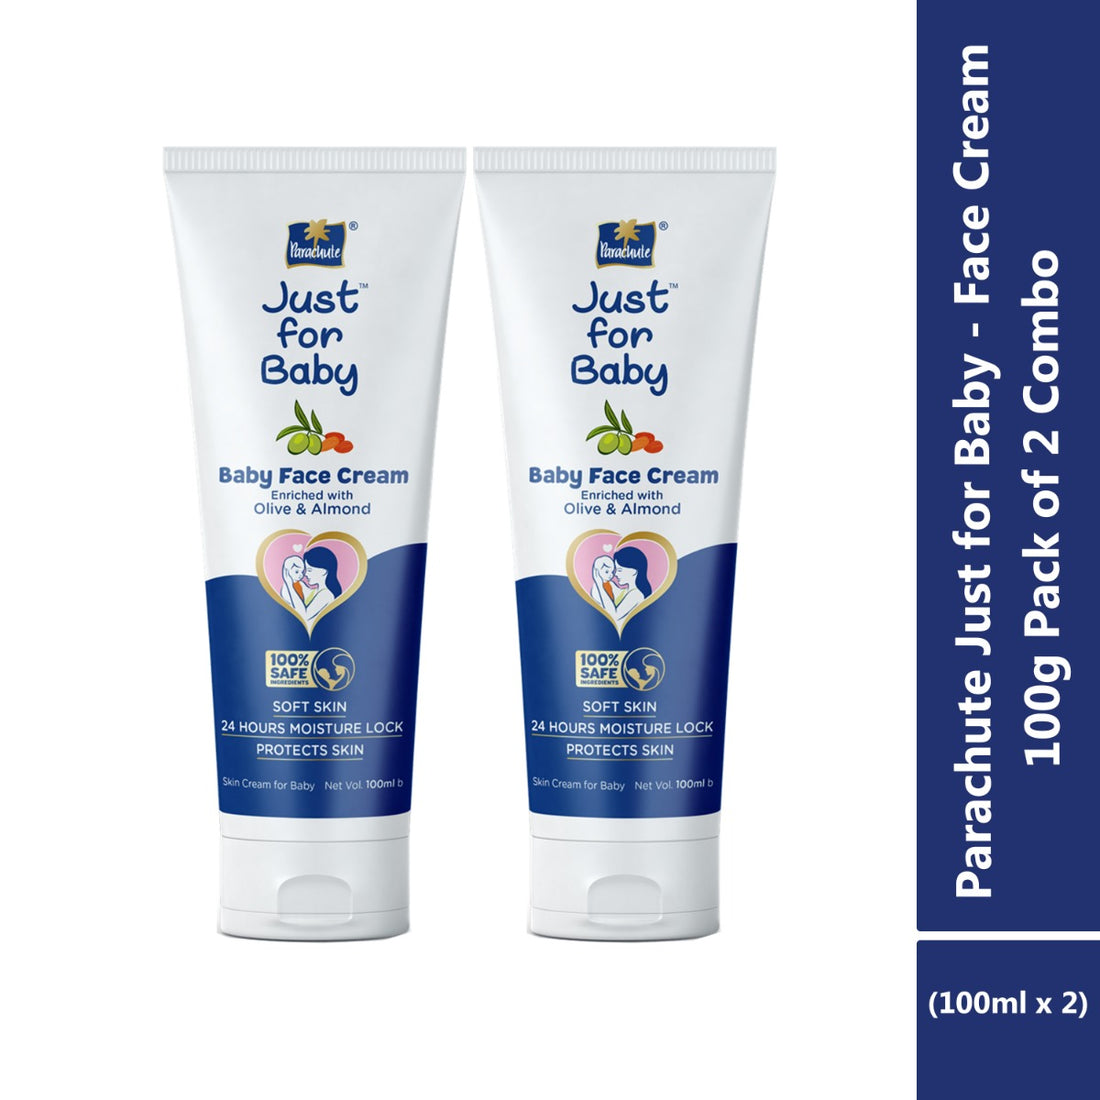 Parachute Just for Baby - Face Cream 100g Pack of 2 Combo (100ml x 2)